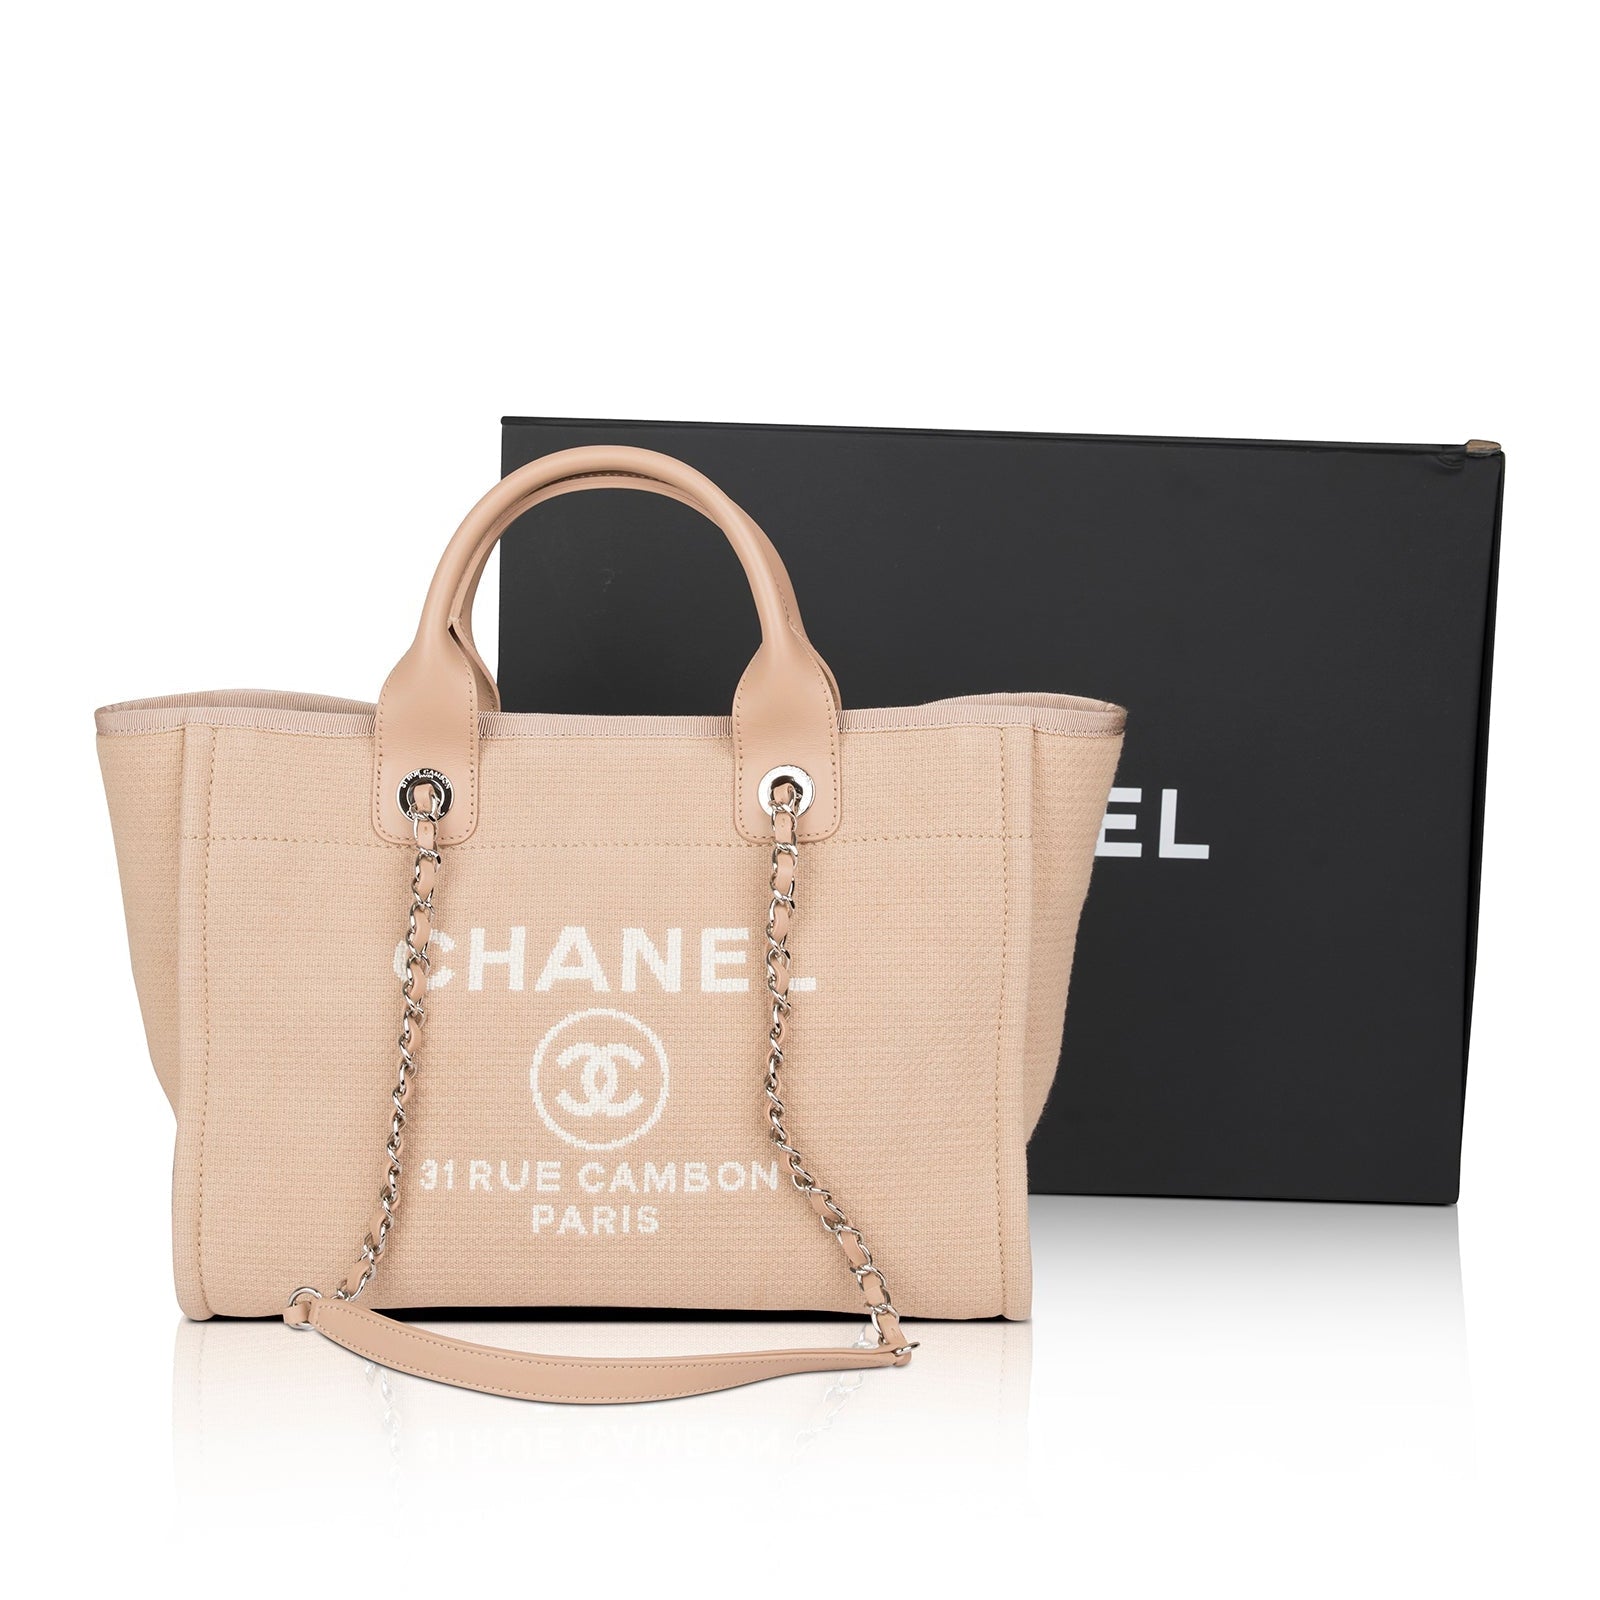 Chanel Mixed Fibers Small Deauville Tote Beige